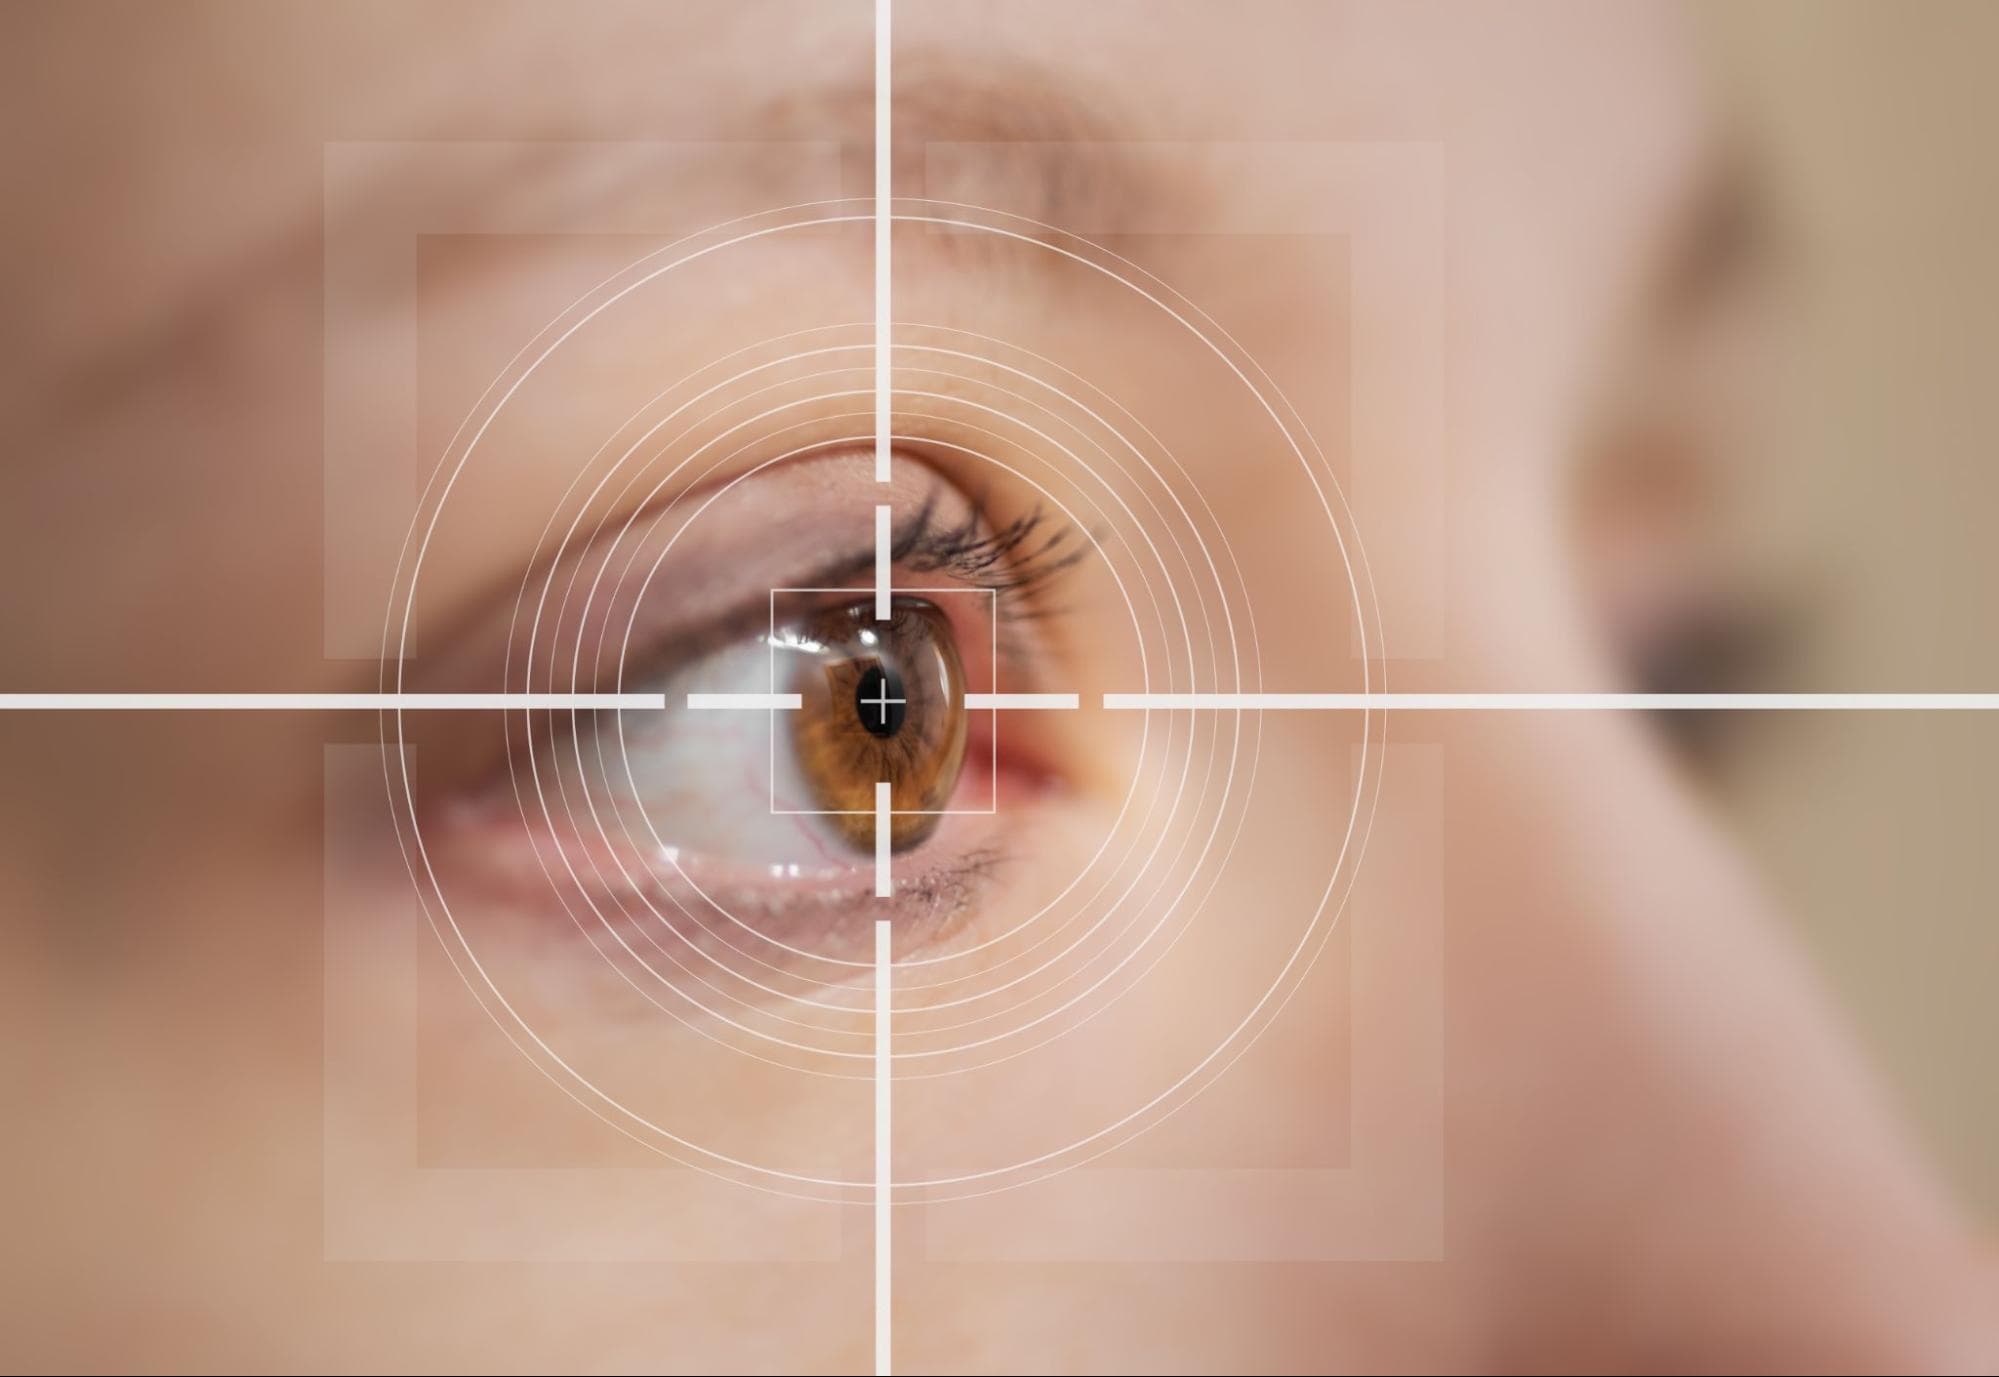 Enhancing Vision Further: Second LASIK Surgery – Is It Possible?